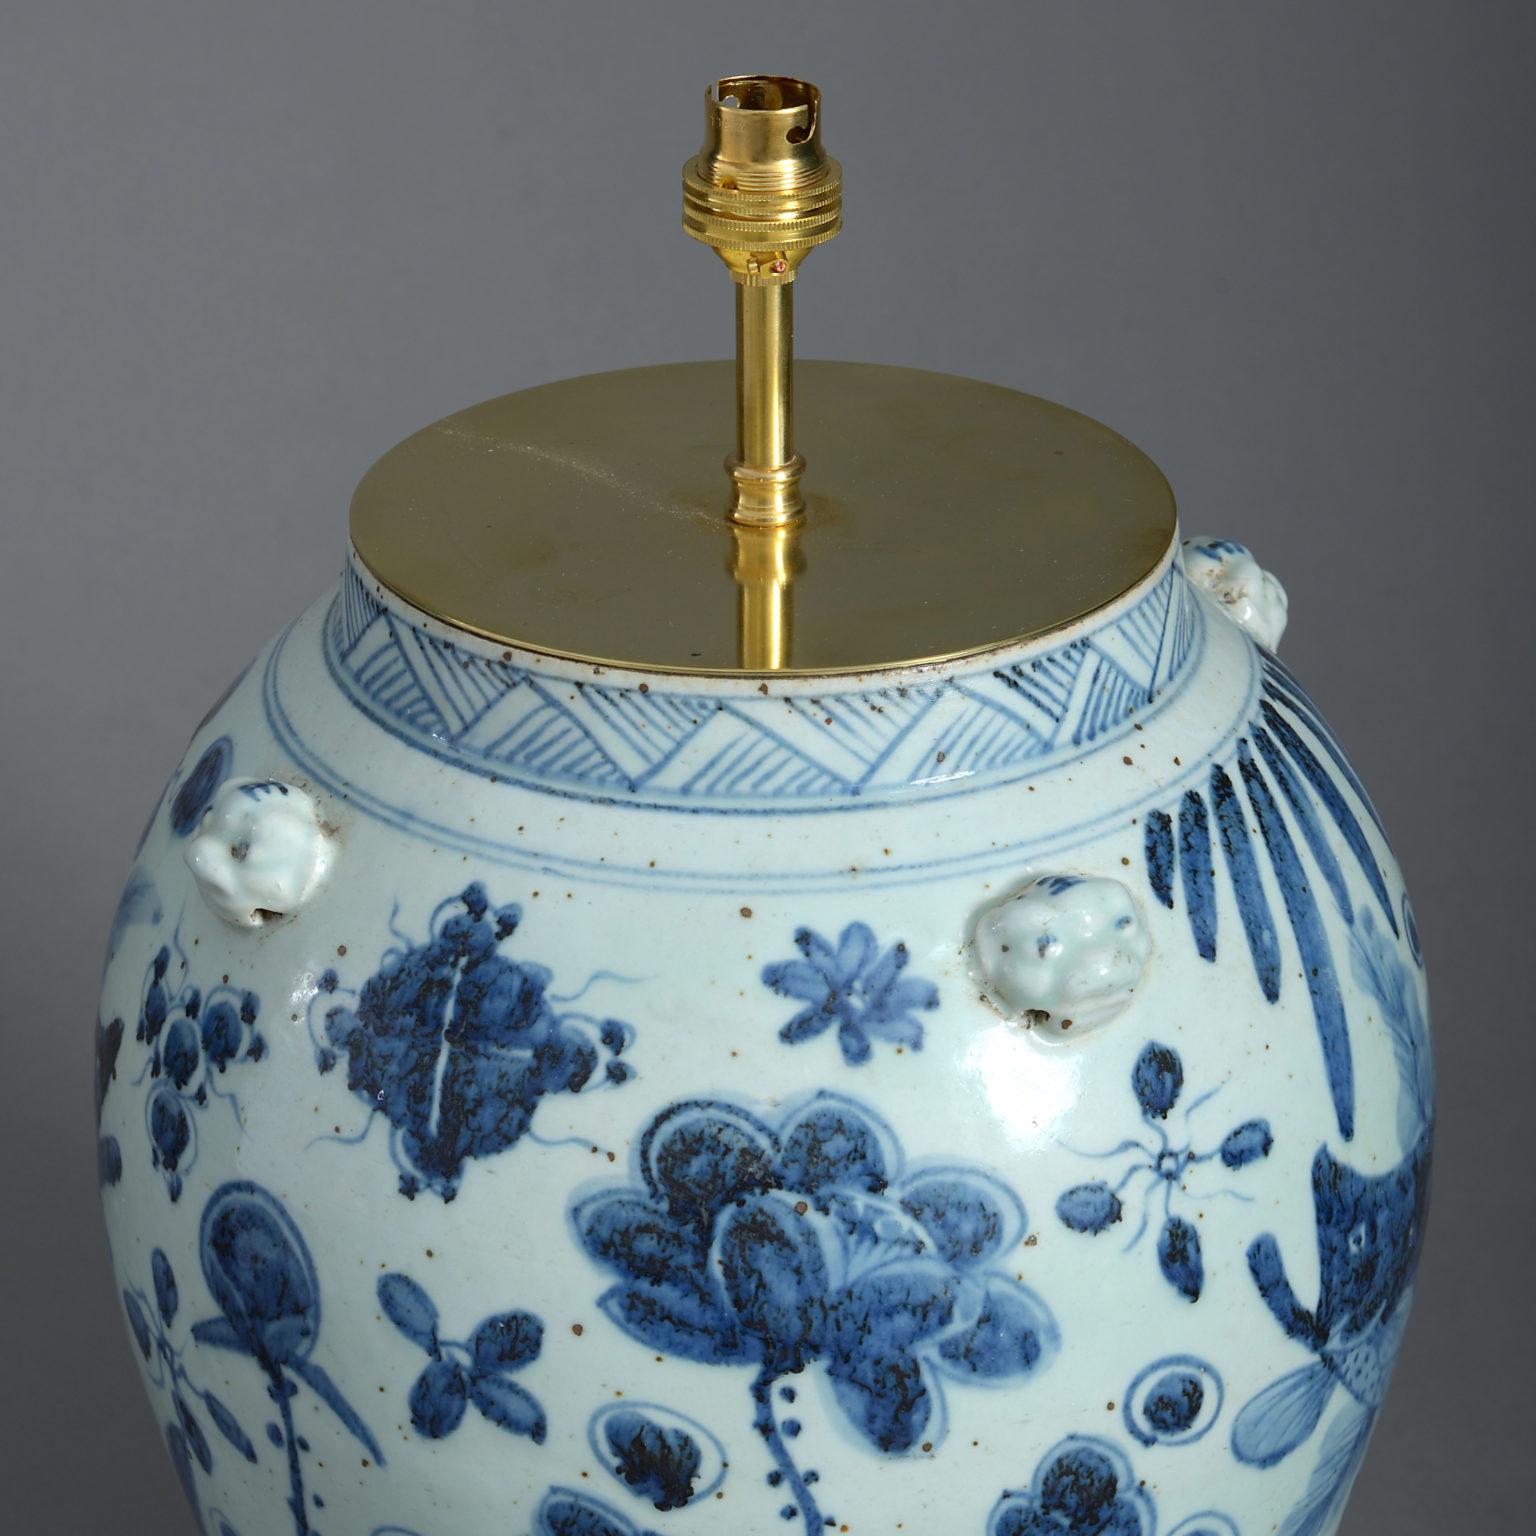 Chinese Export Blue and White Porcelain Vase Lamp Decorated with Fish and Seaweed